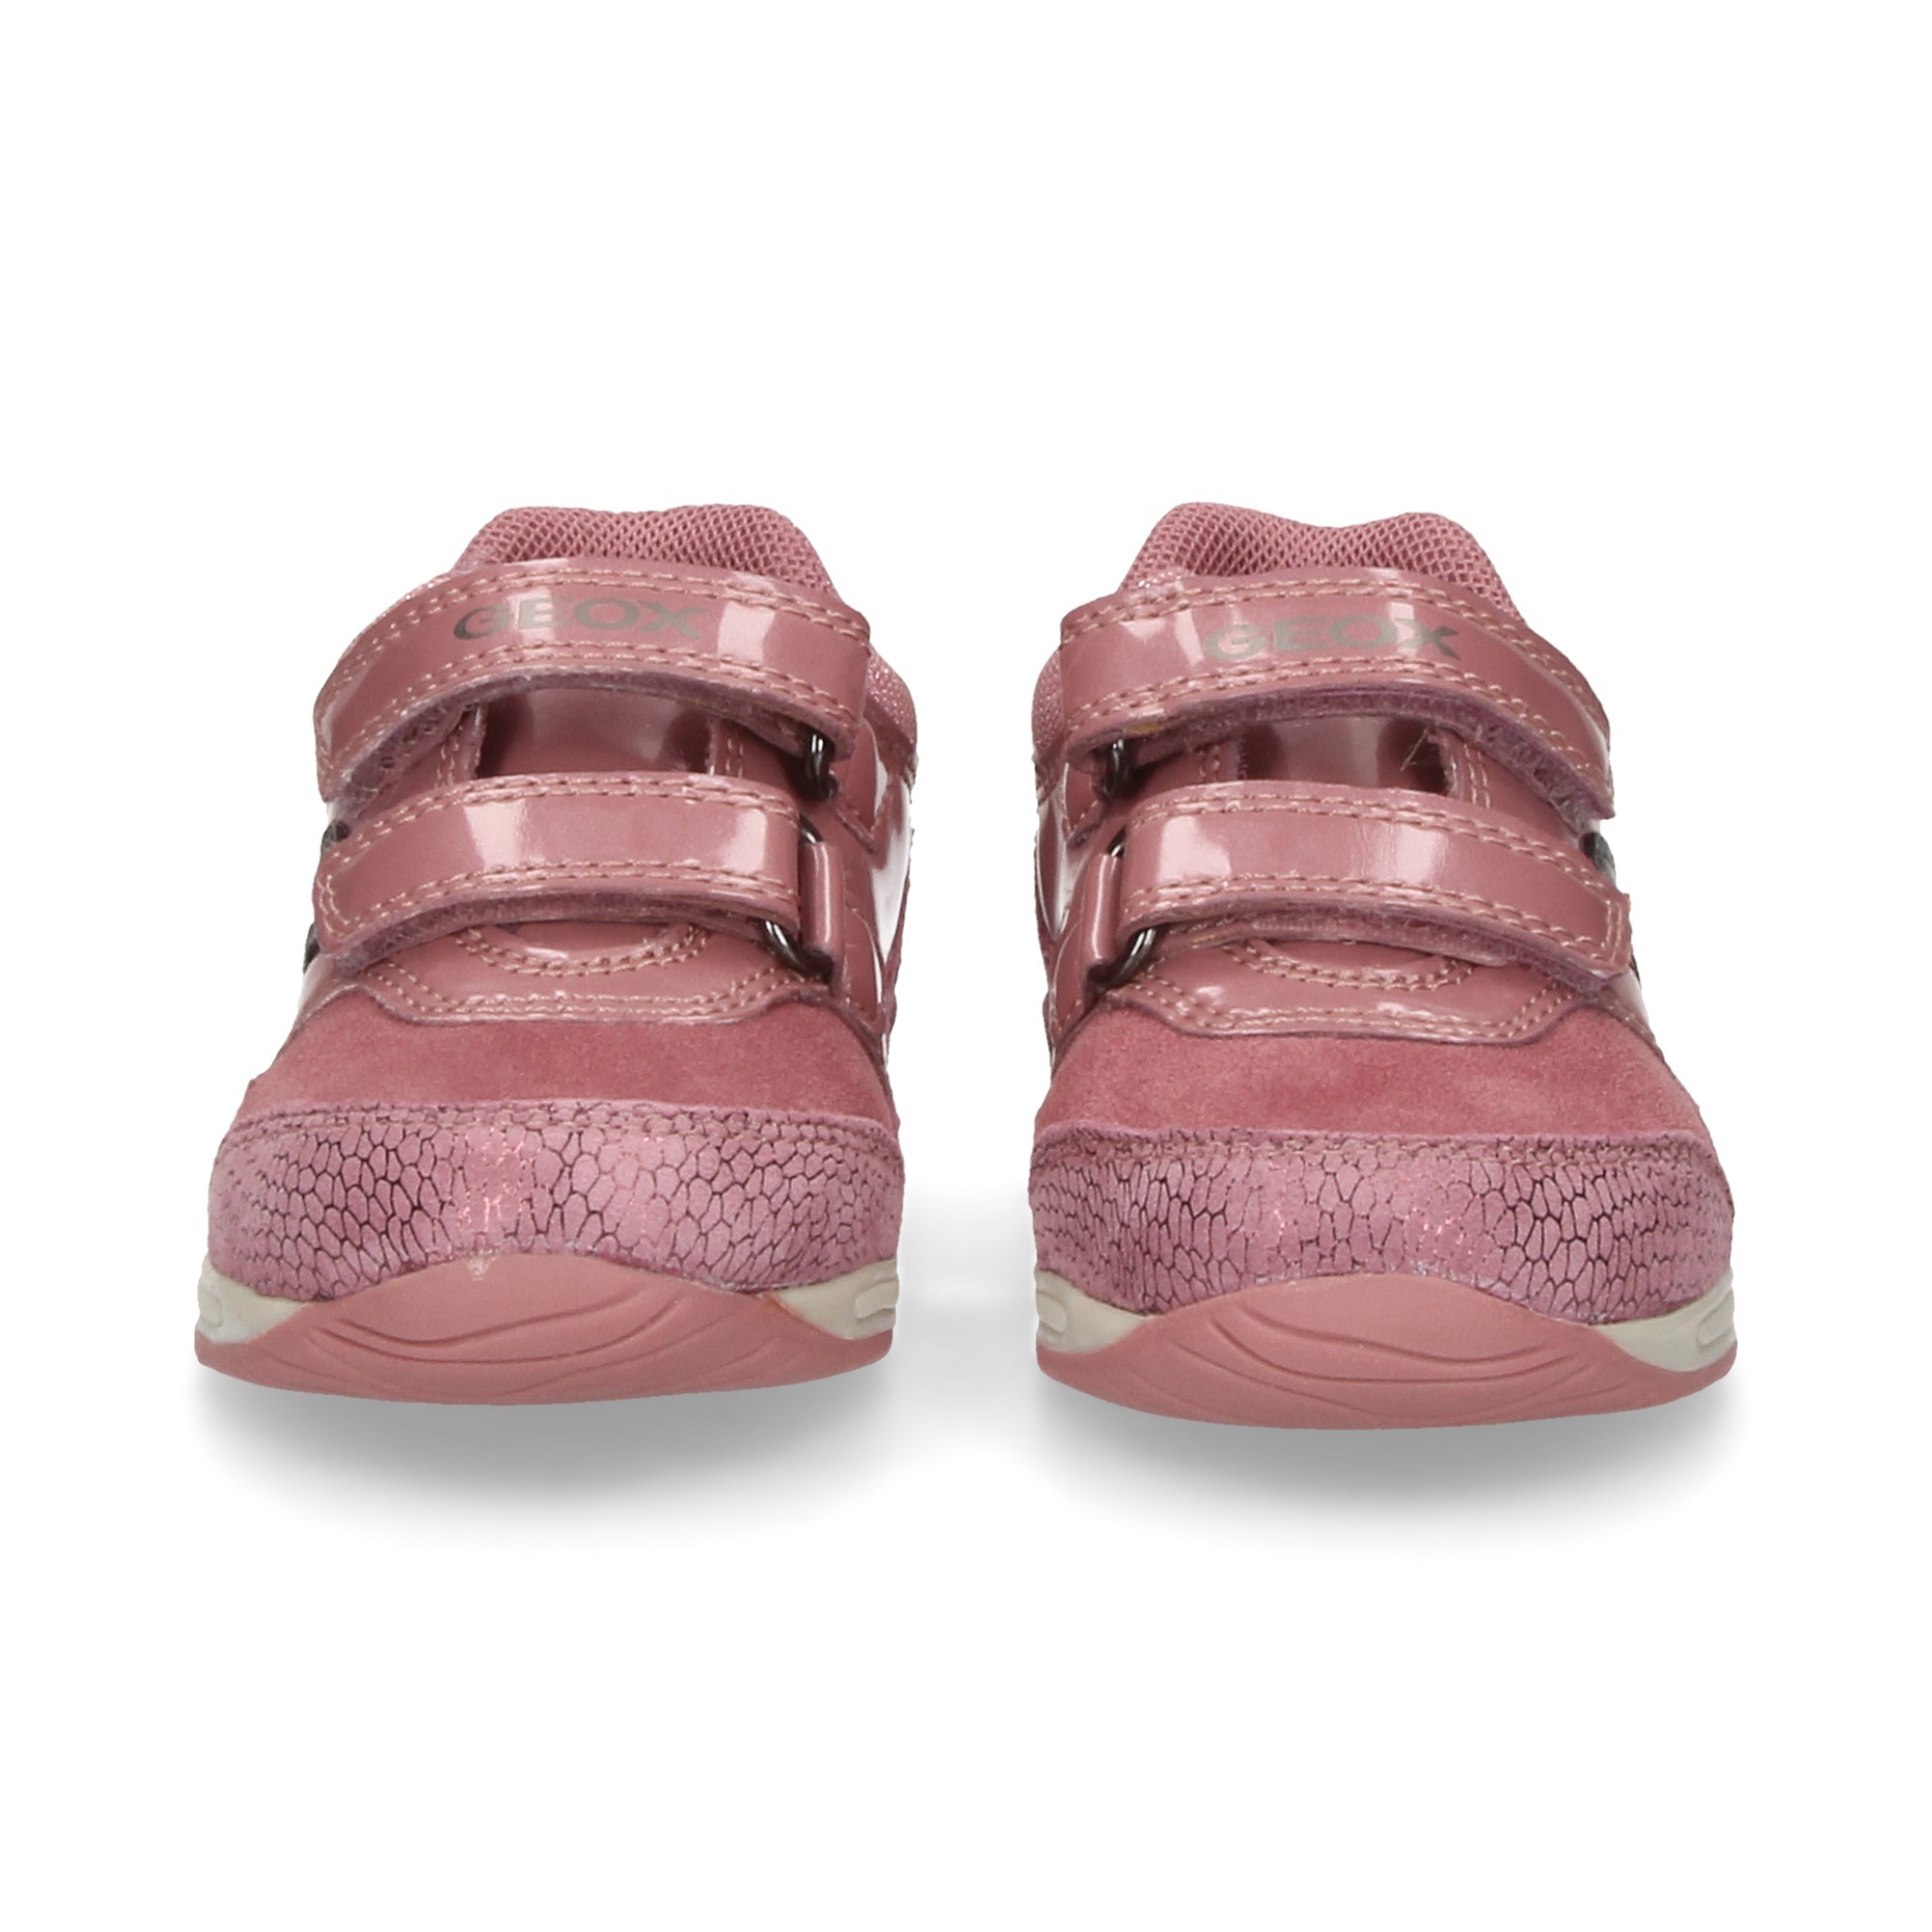 2-patent-leather-velcro-pink-reptile-front